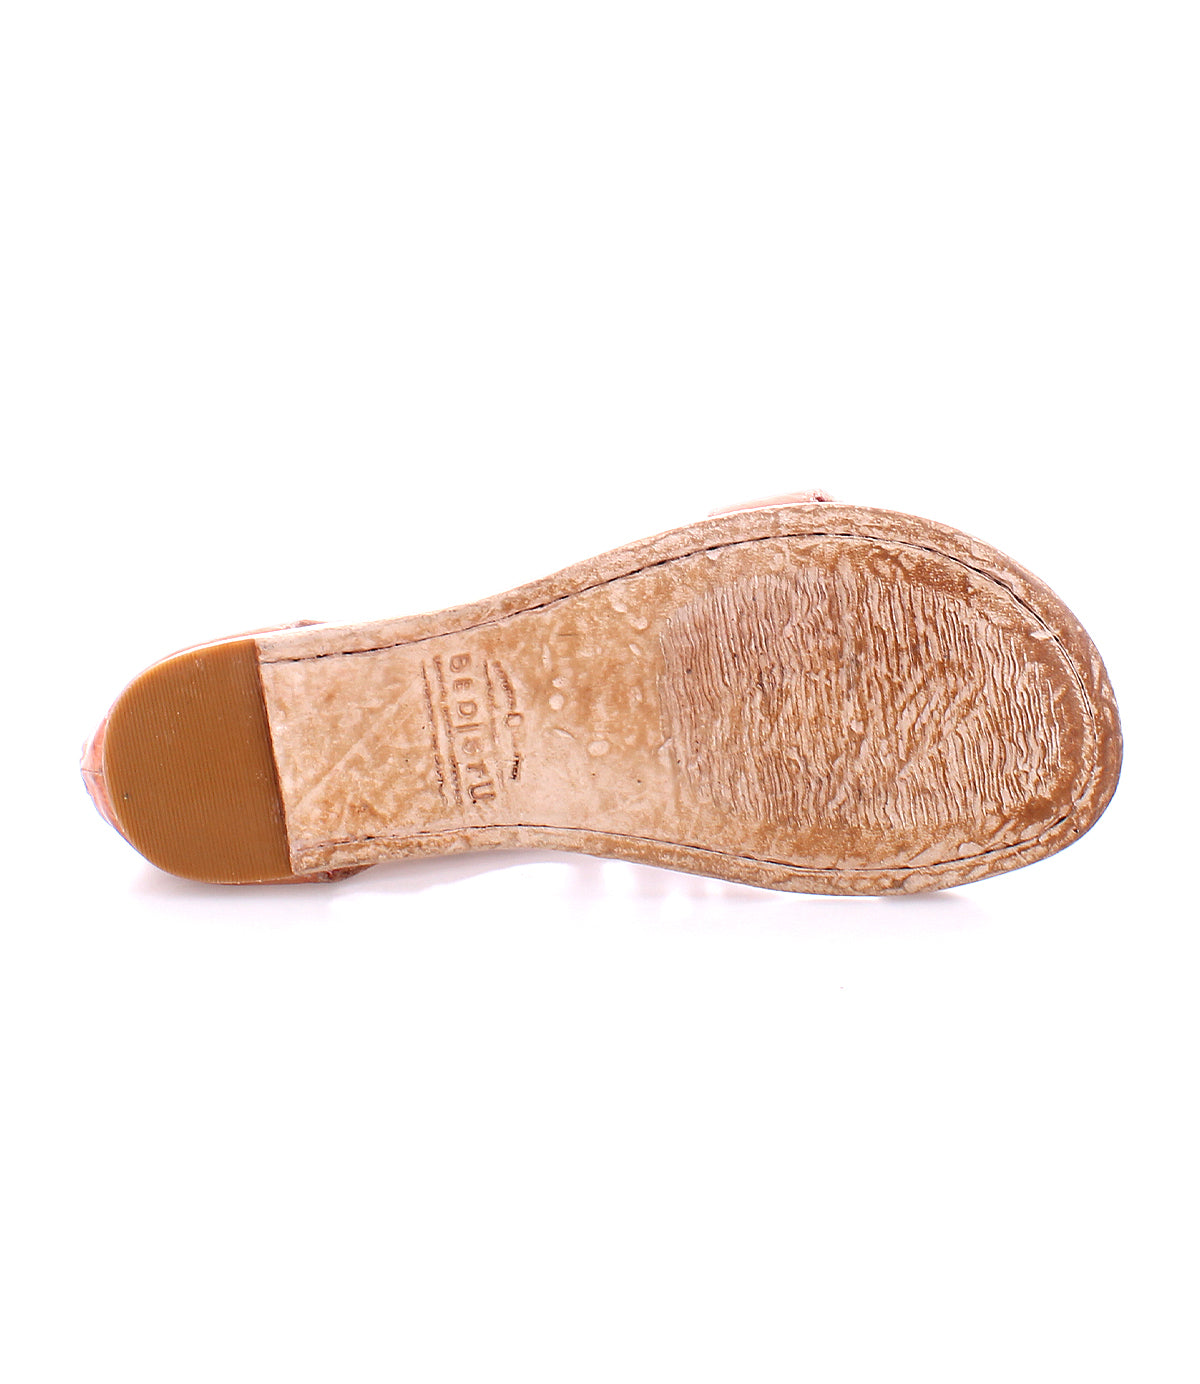 Sole of a Bed Stu Soto Cutout leather sandal against a white background.